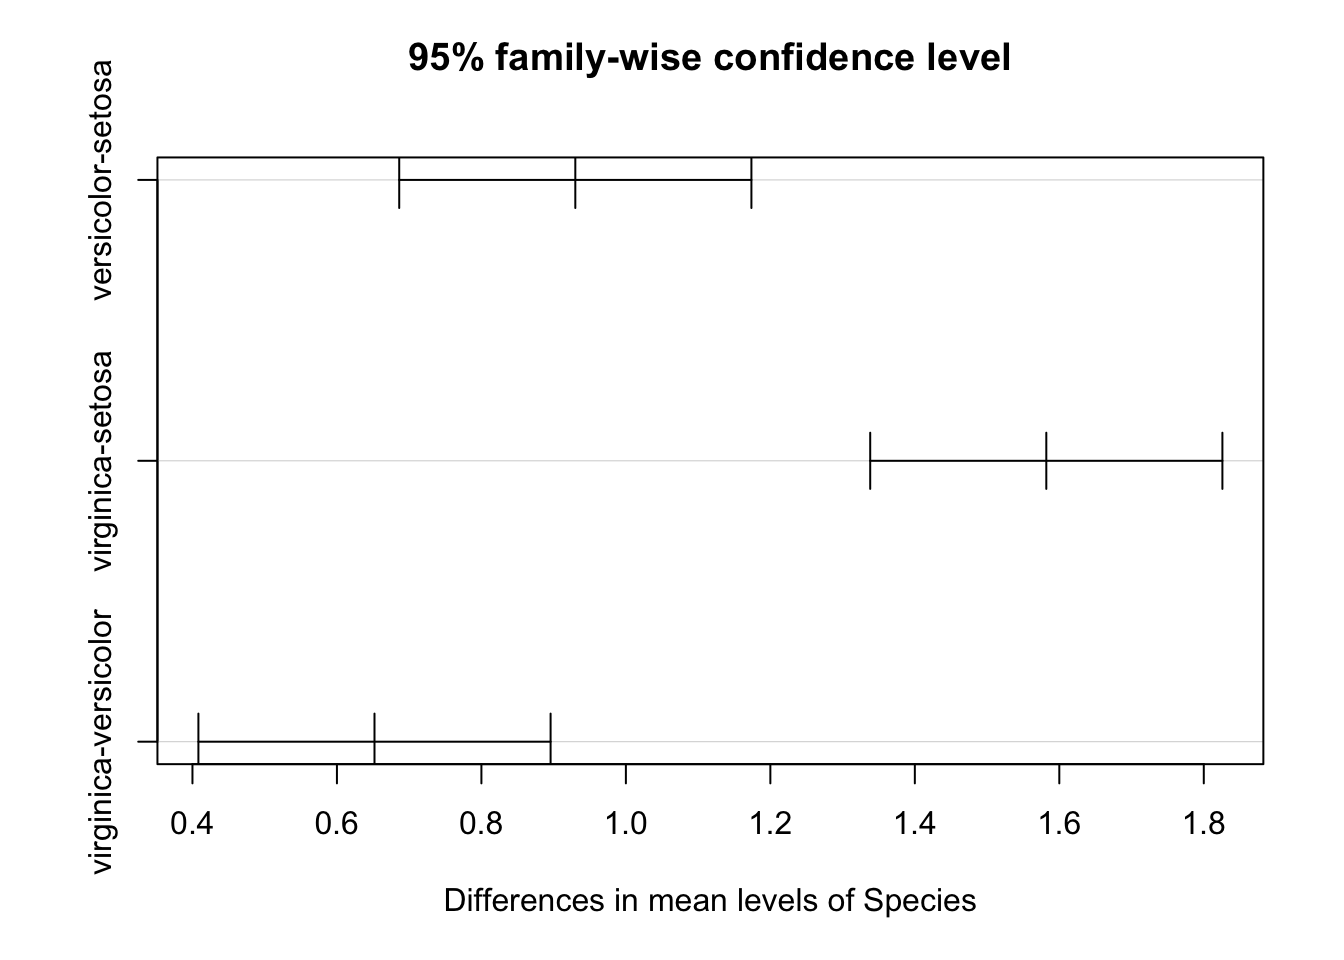 Results of a post-hoc Tukey test showing the confidence interval for the effect size between each group.